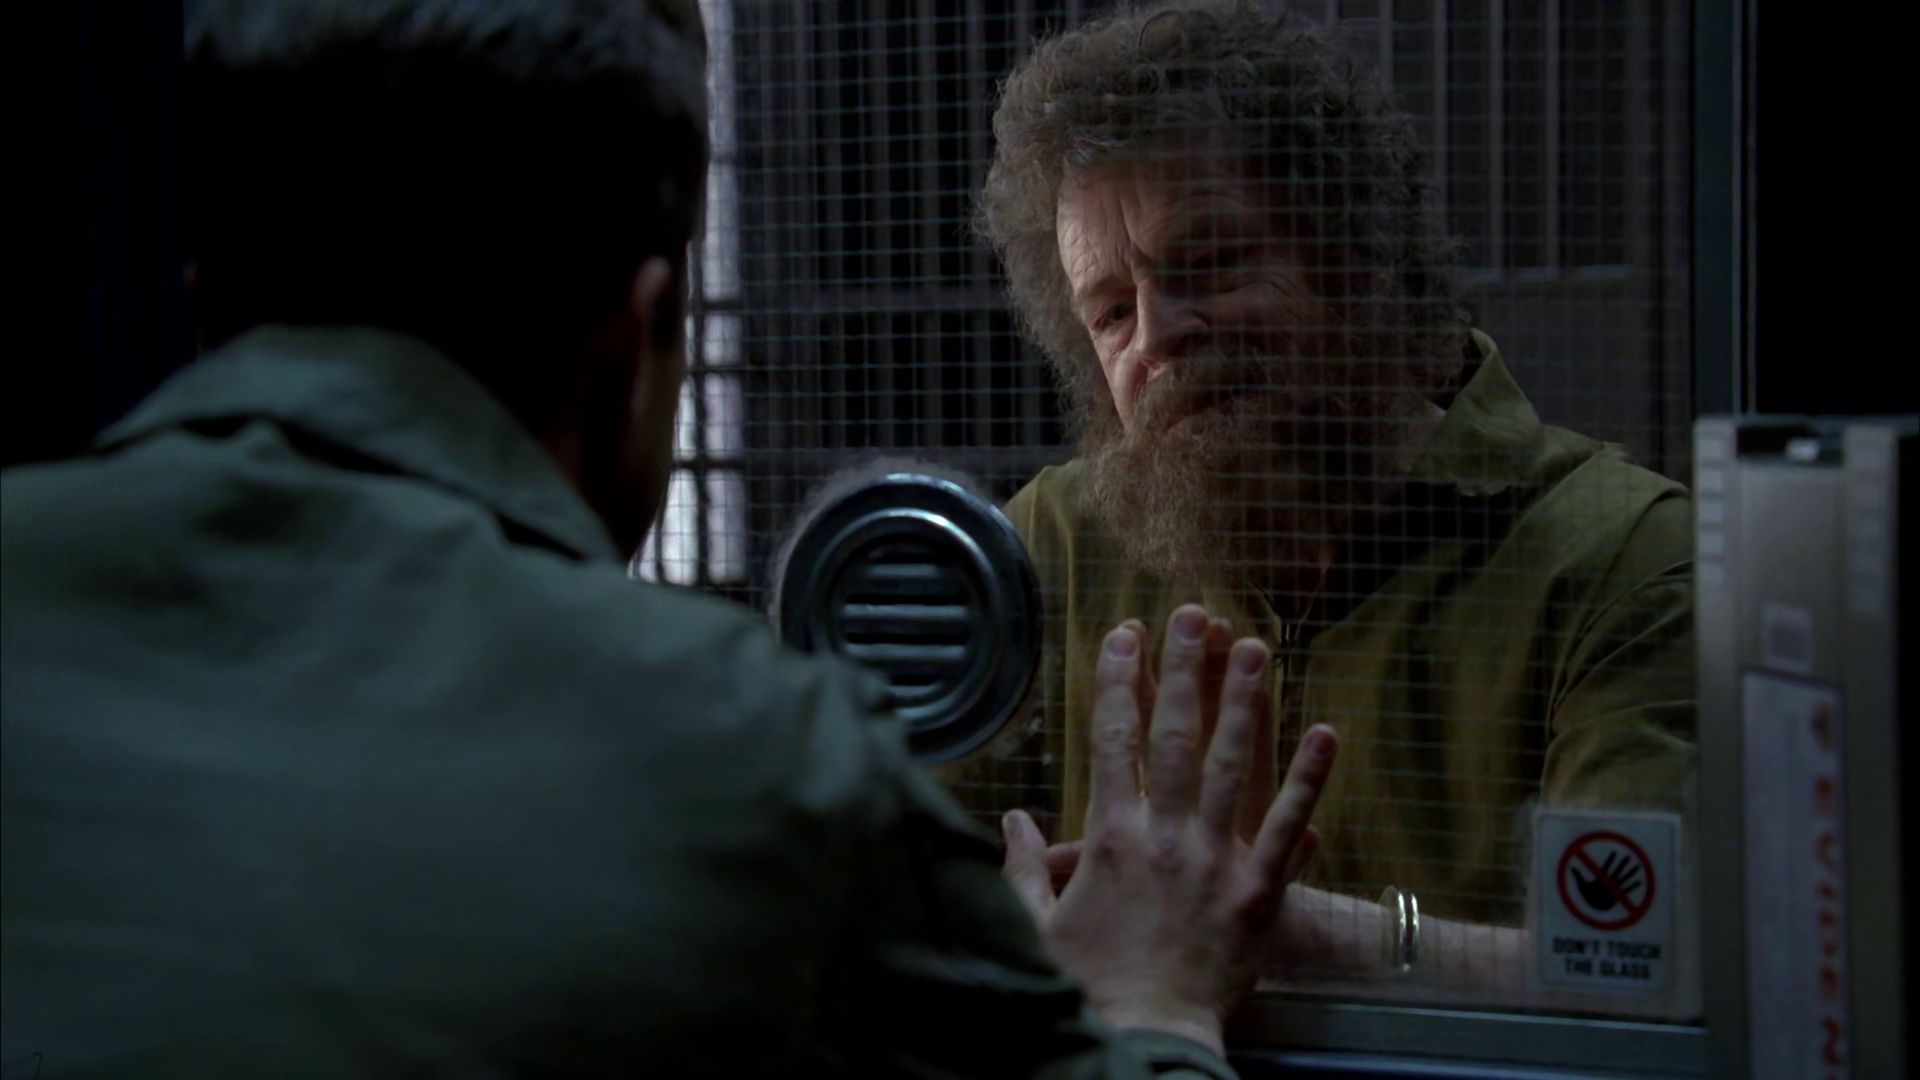 Potential Future: Walter in jail